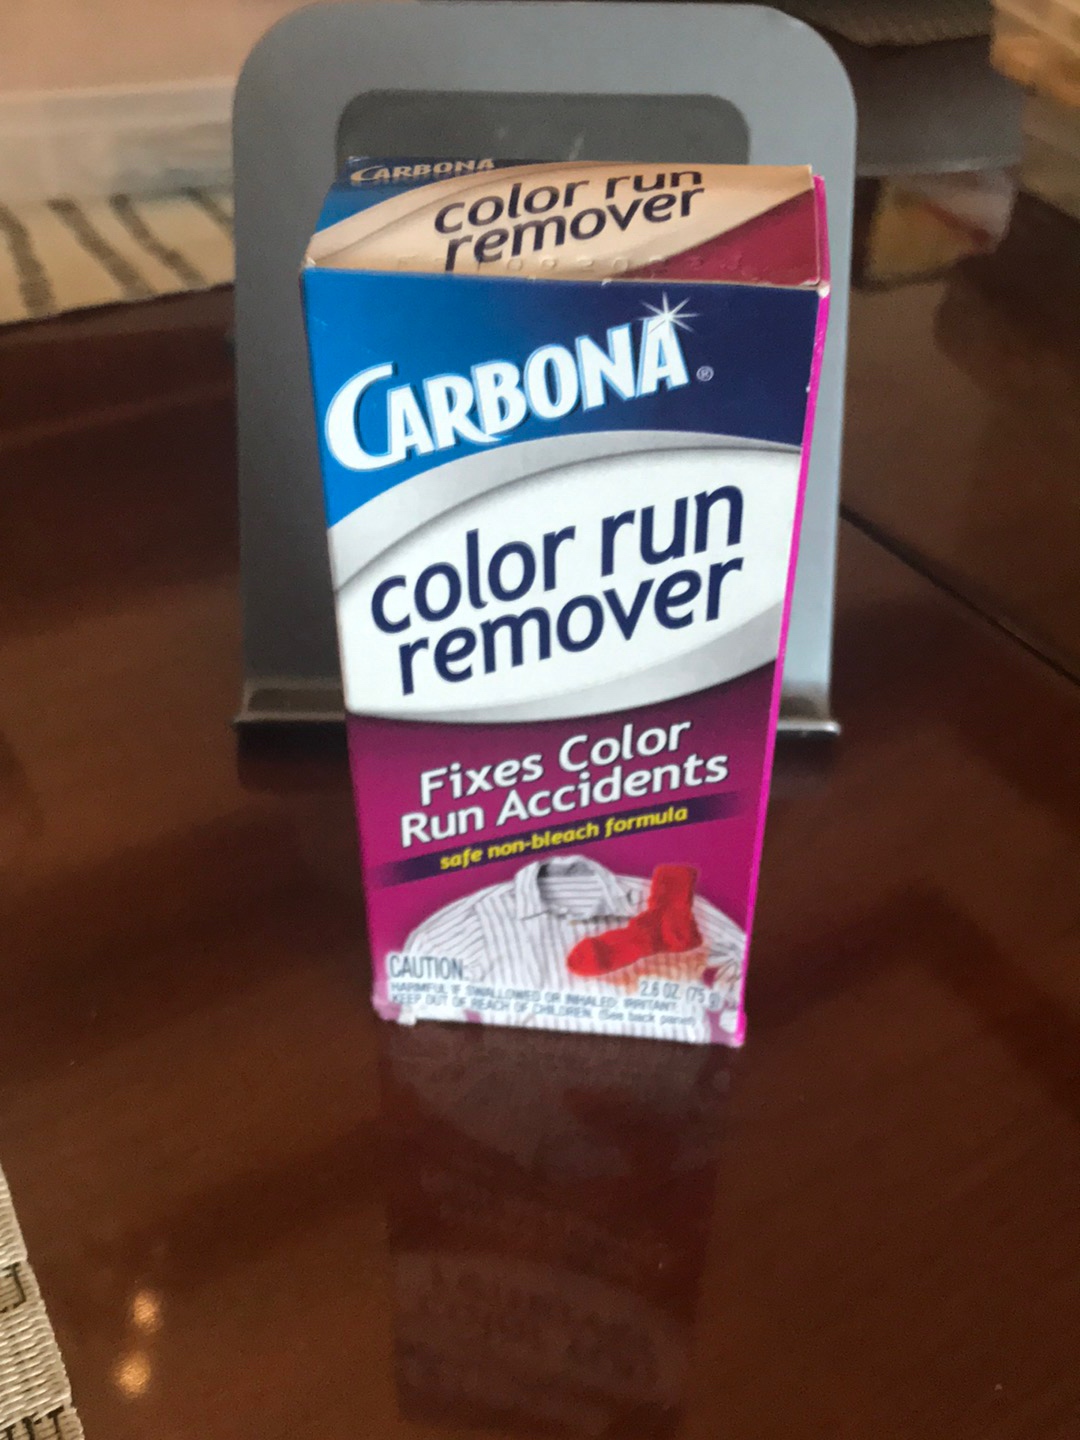 Buy Carbona: Color Run Remover, 2.6 Oz Online, Bulk Cleaning Products for  Sale at Wholesale Prices